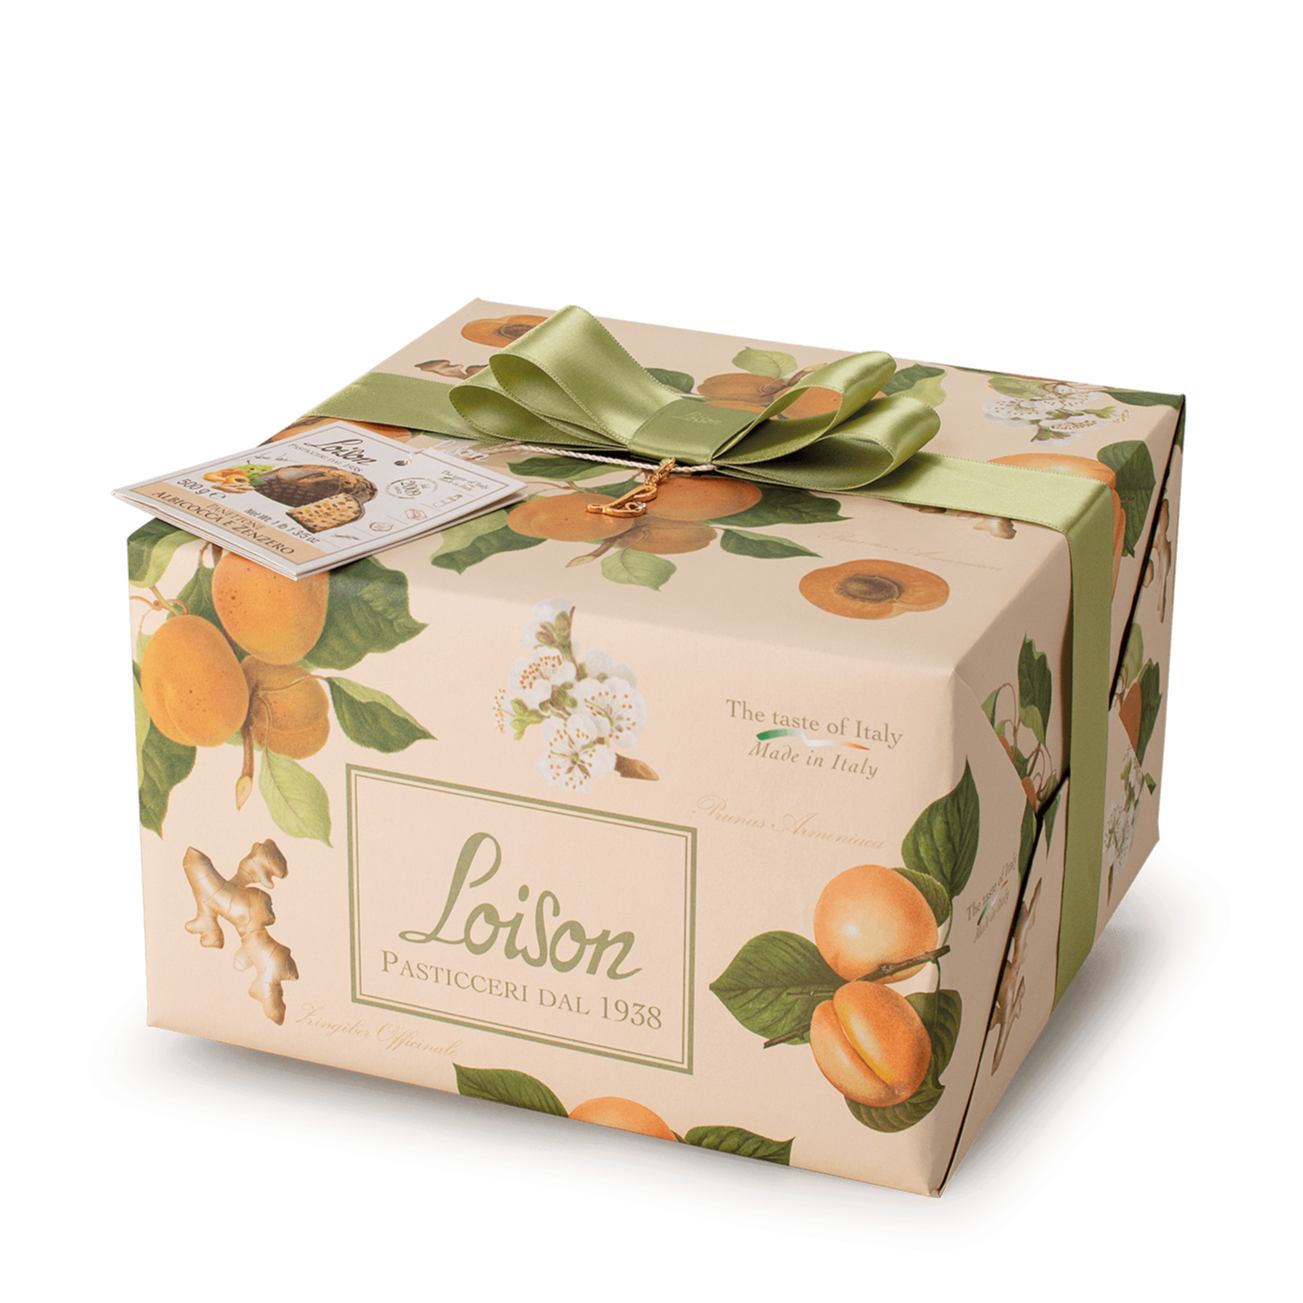 WHOLESALE PREORDER ONLY Panettone Apricot & Ginger - Frutta & Fiore, by Loison, 1.1 lbs (500 g), 6/CS *9260*